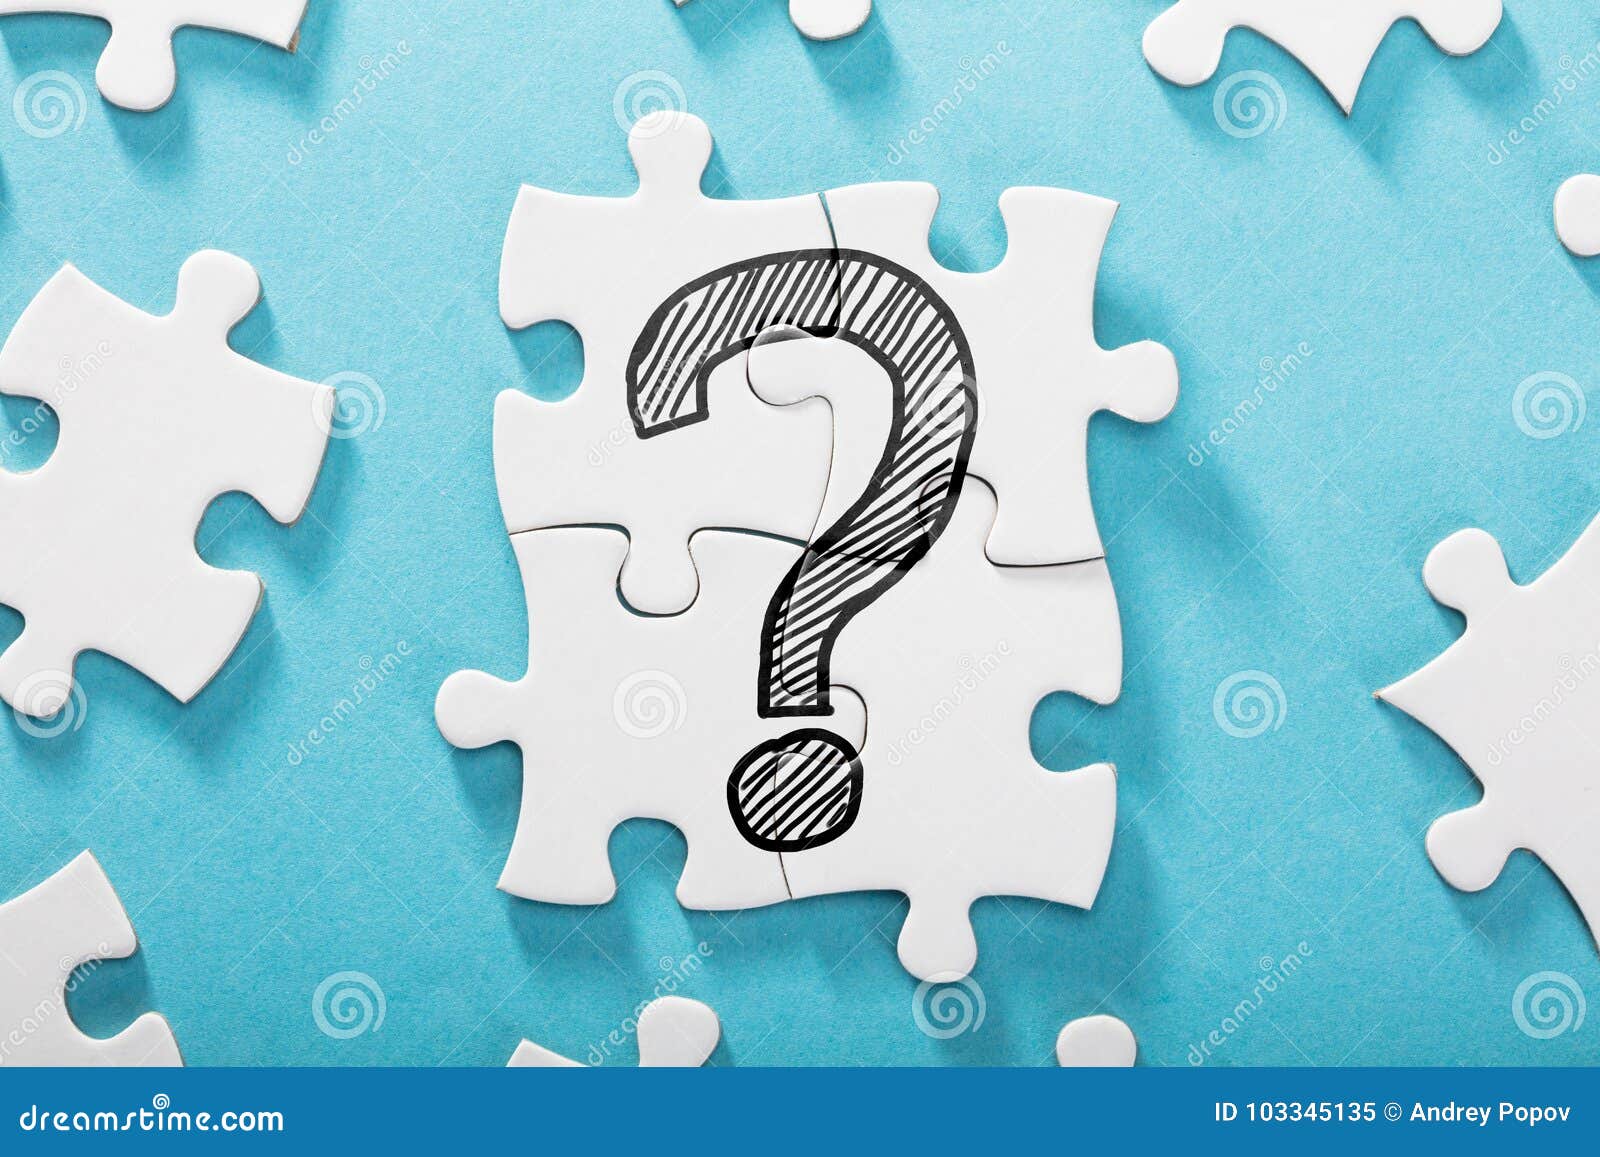 Question Mark Icon on White Puzzle Stock Image - Image of business ...